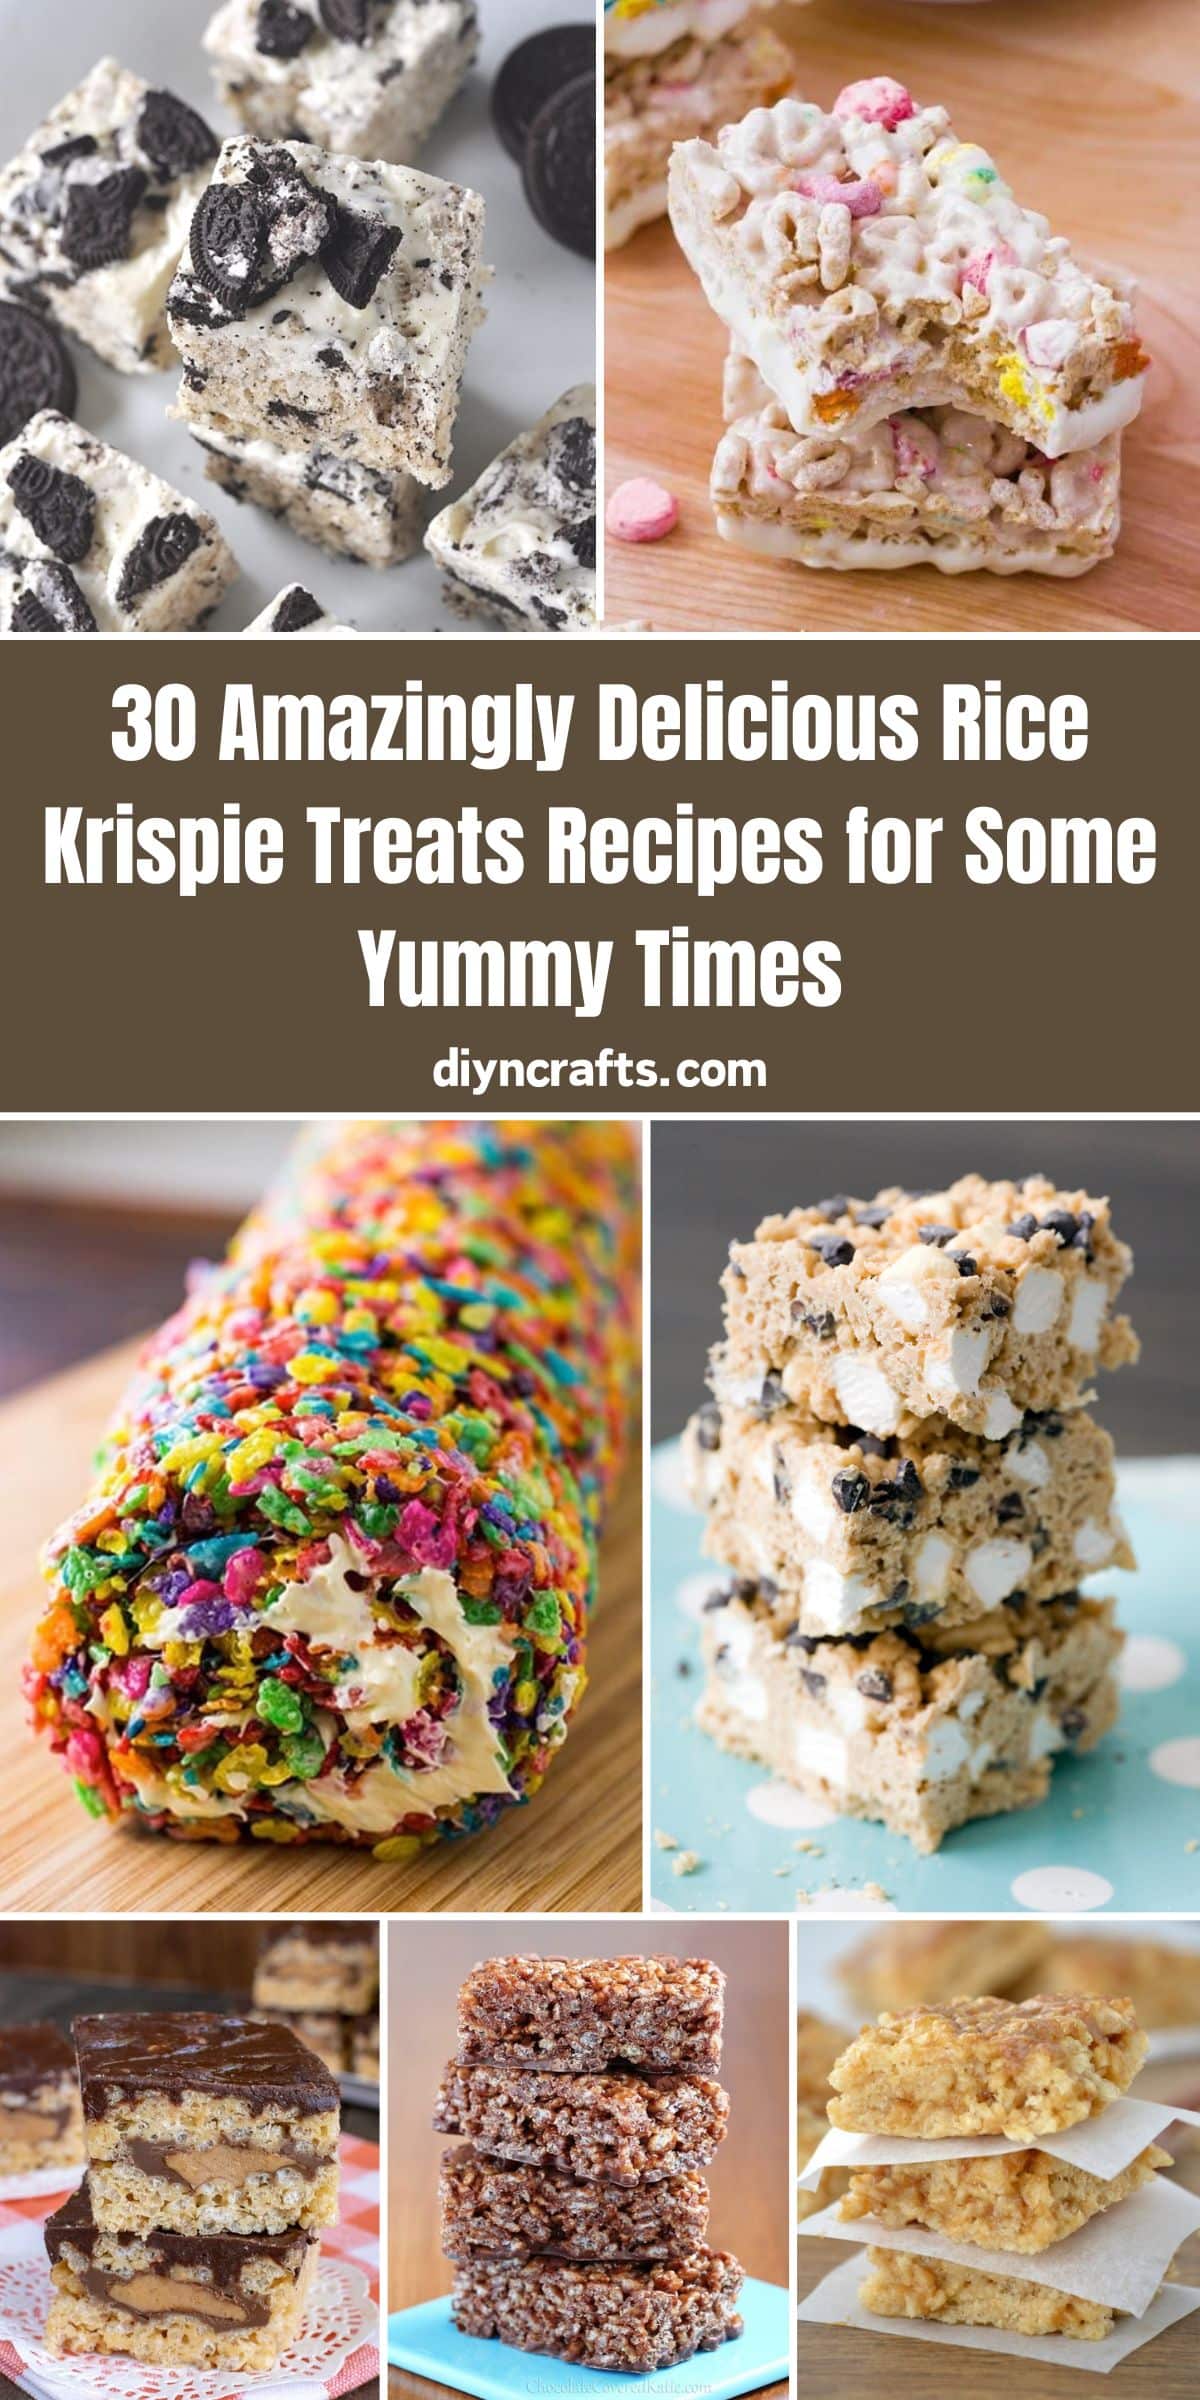 30 Amazingly Delicious Rice Krispie Treats Recipes for Some Yummy Times ...